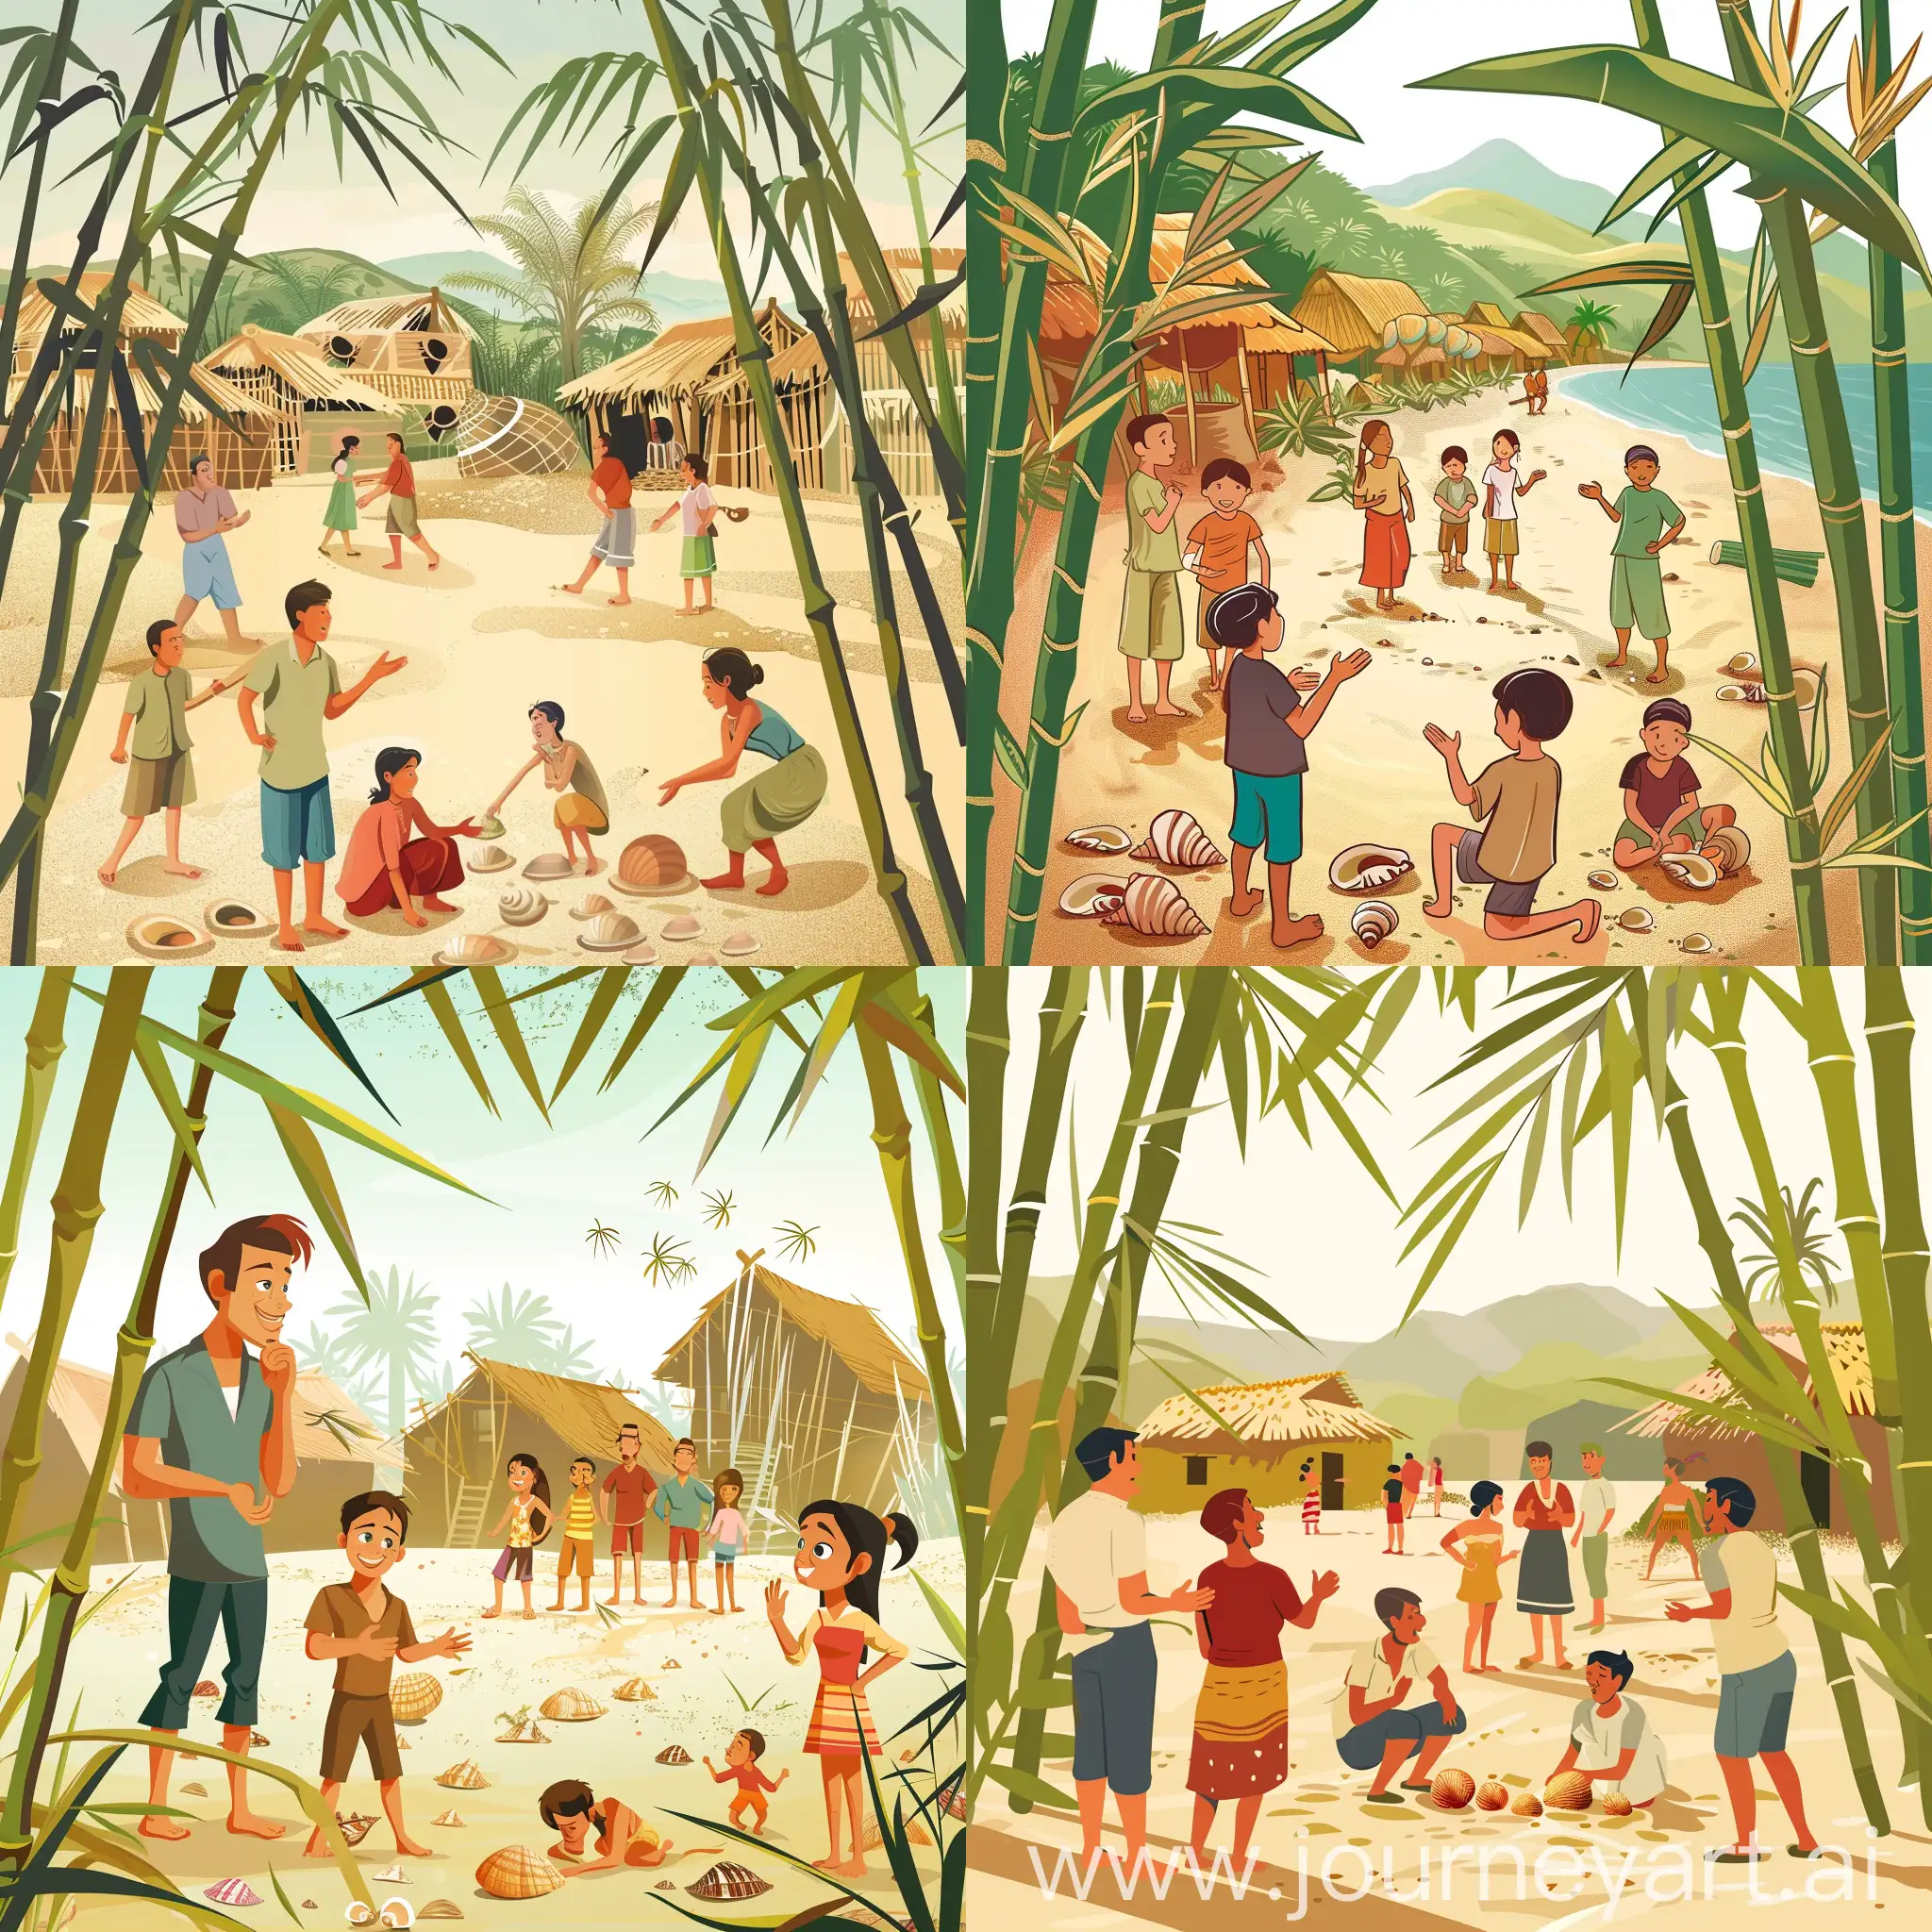 town people talking in small village with bamboo trees other people looking and digging for shells in beach cartoon style vector 